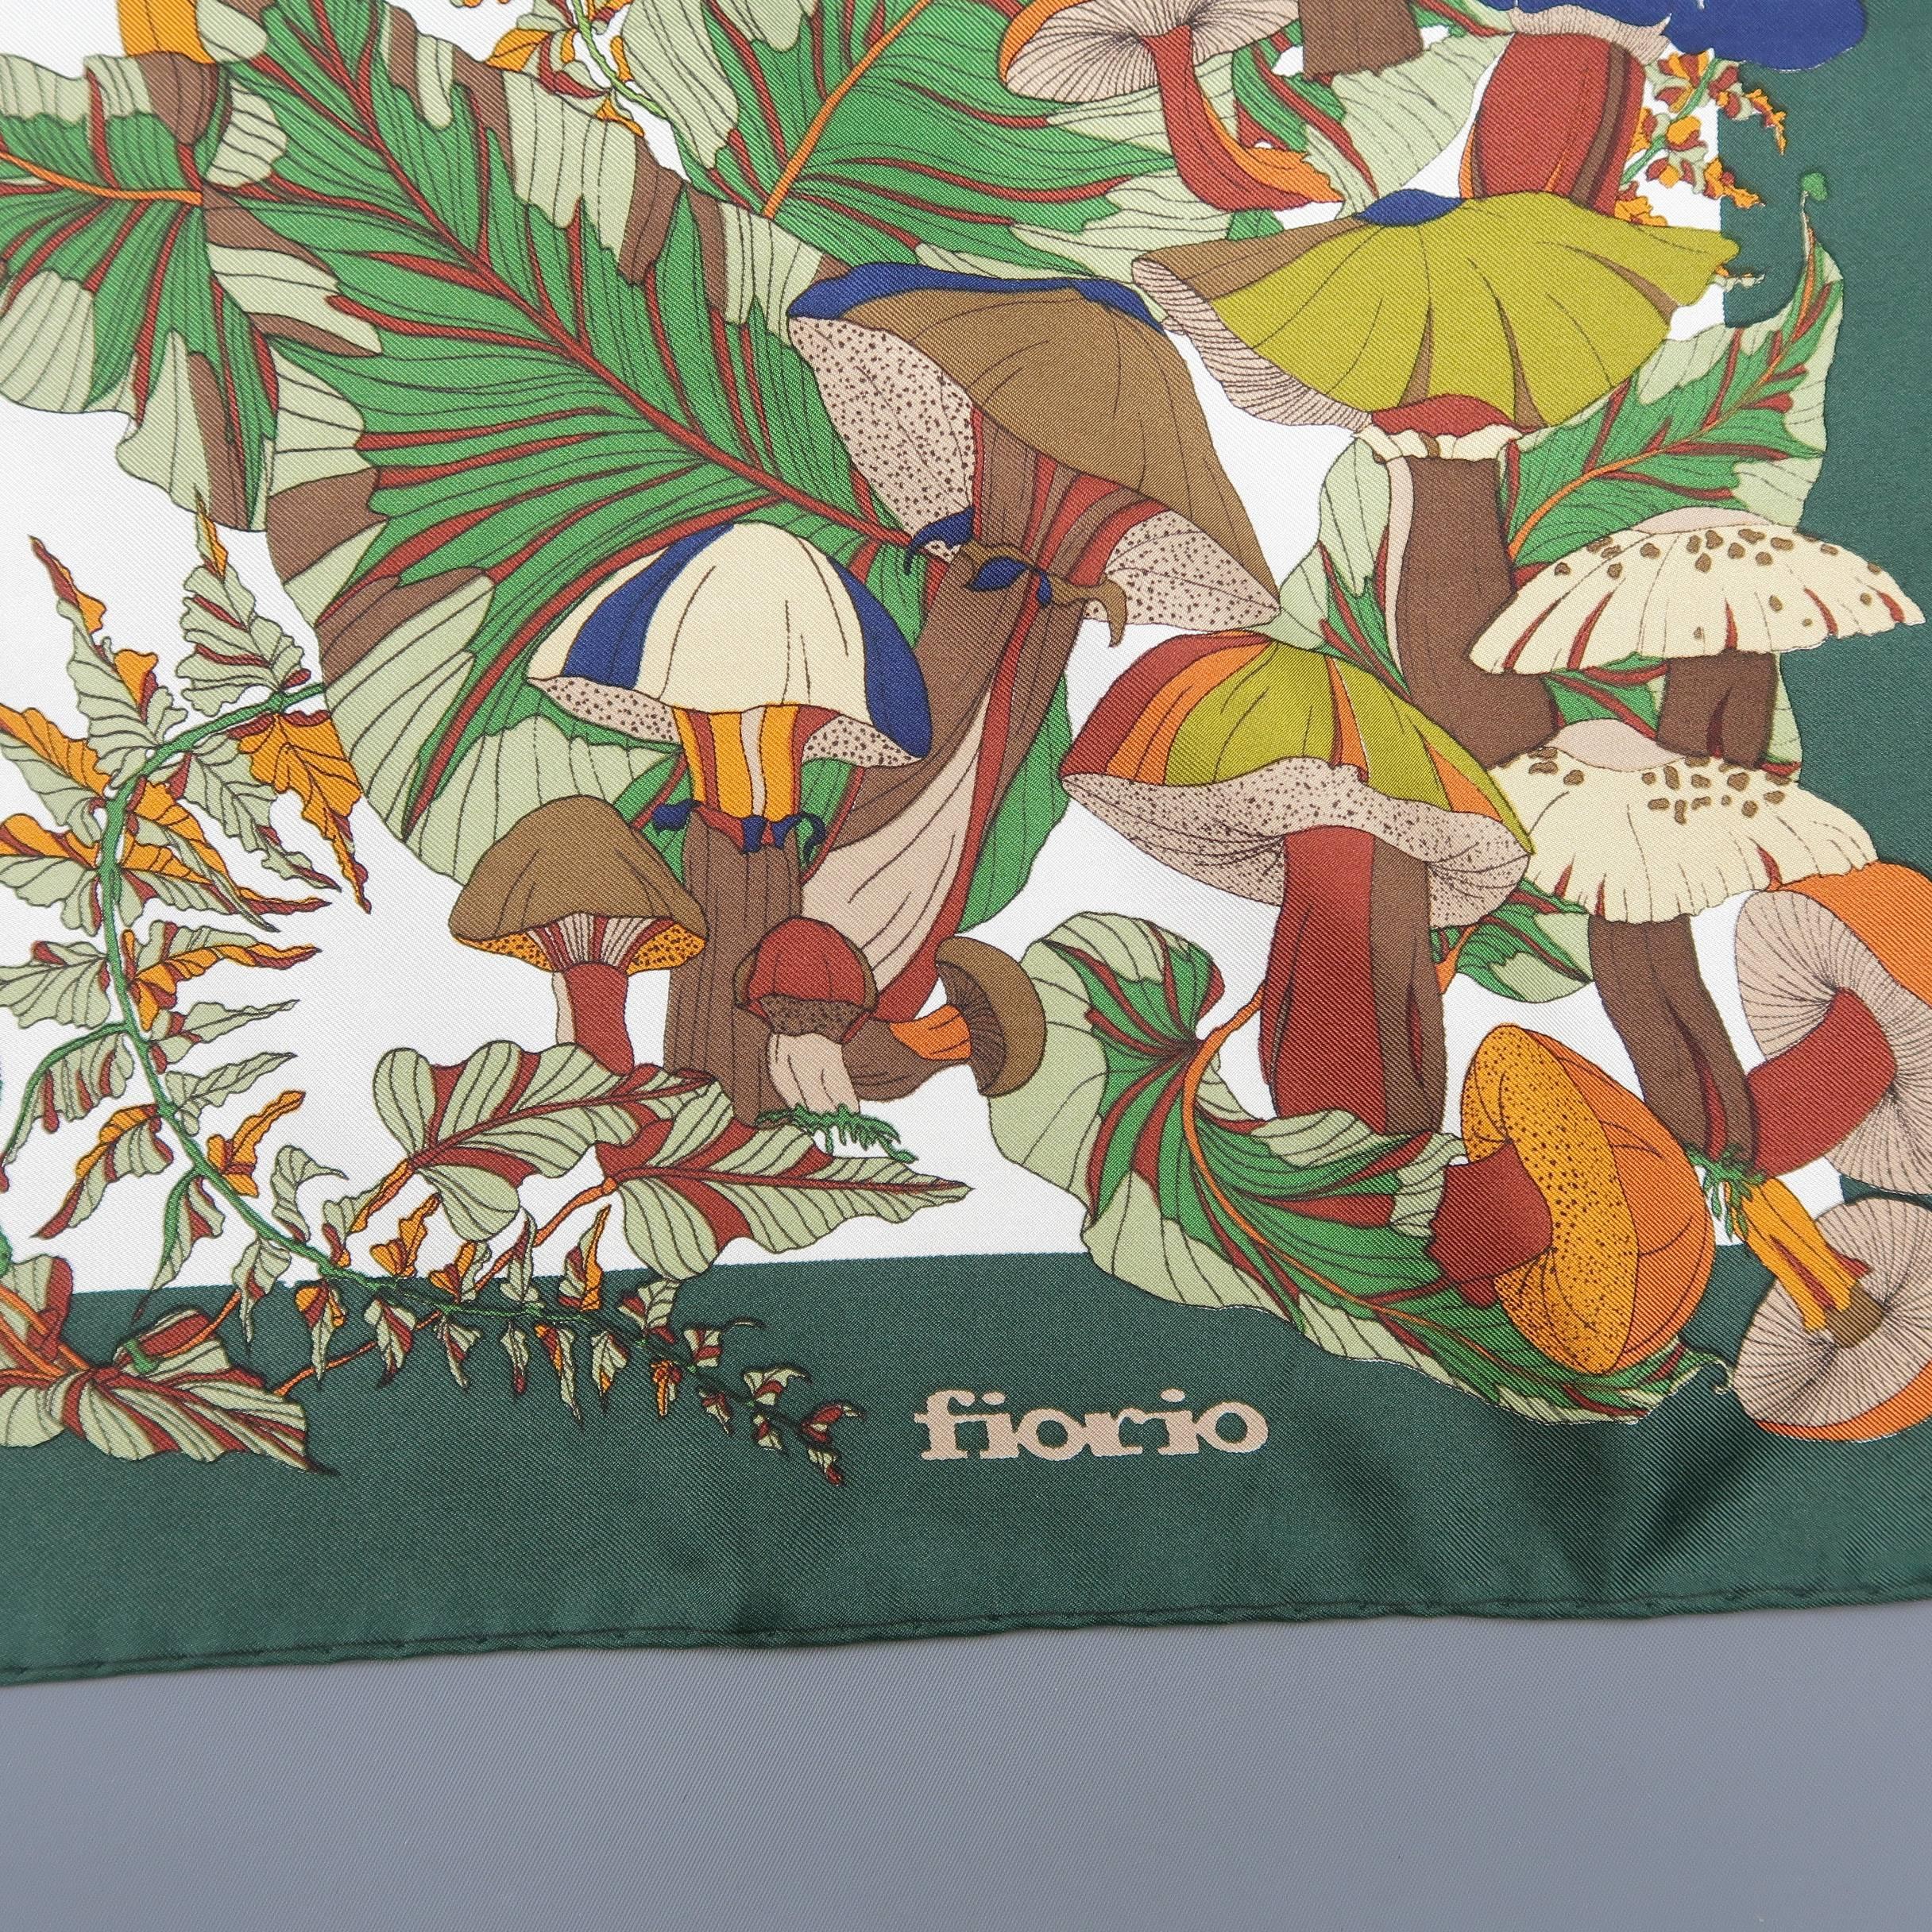 Vintage LOEWE scarf comes in cream and forest green hand rolled silk  twill with an all over autumn mushroom print by Fiorio.
 
Excellent Pre-Owned Condition.
 
33.5 x 33.5 in.
